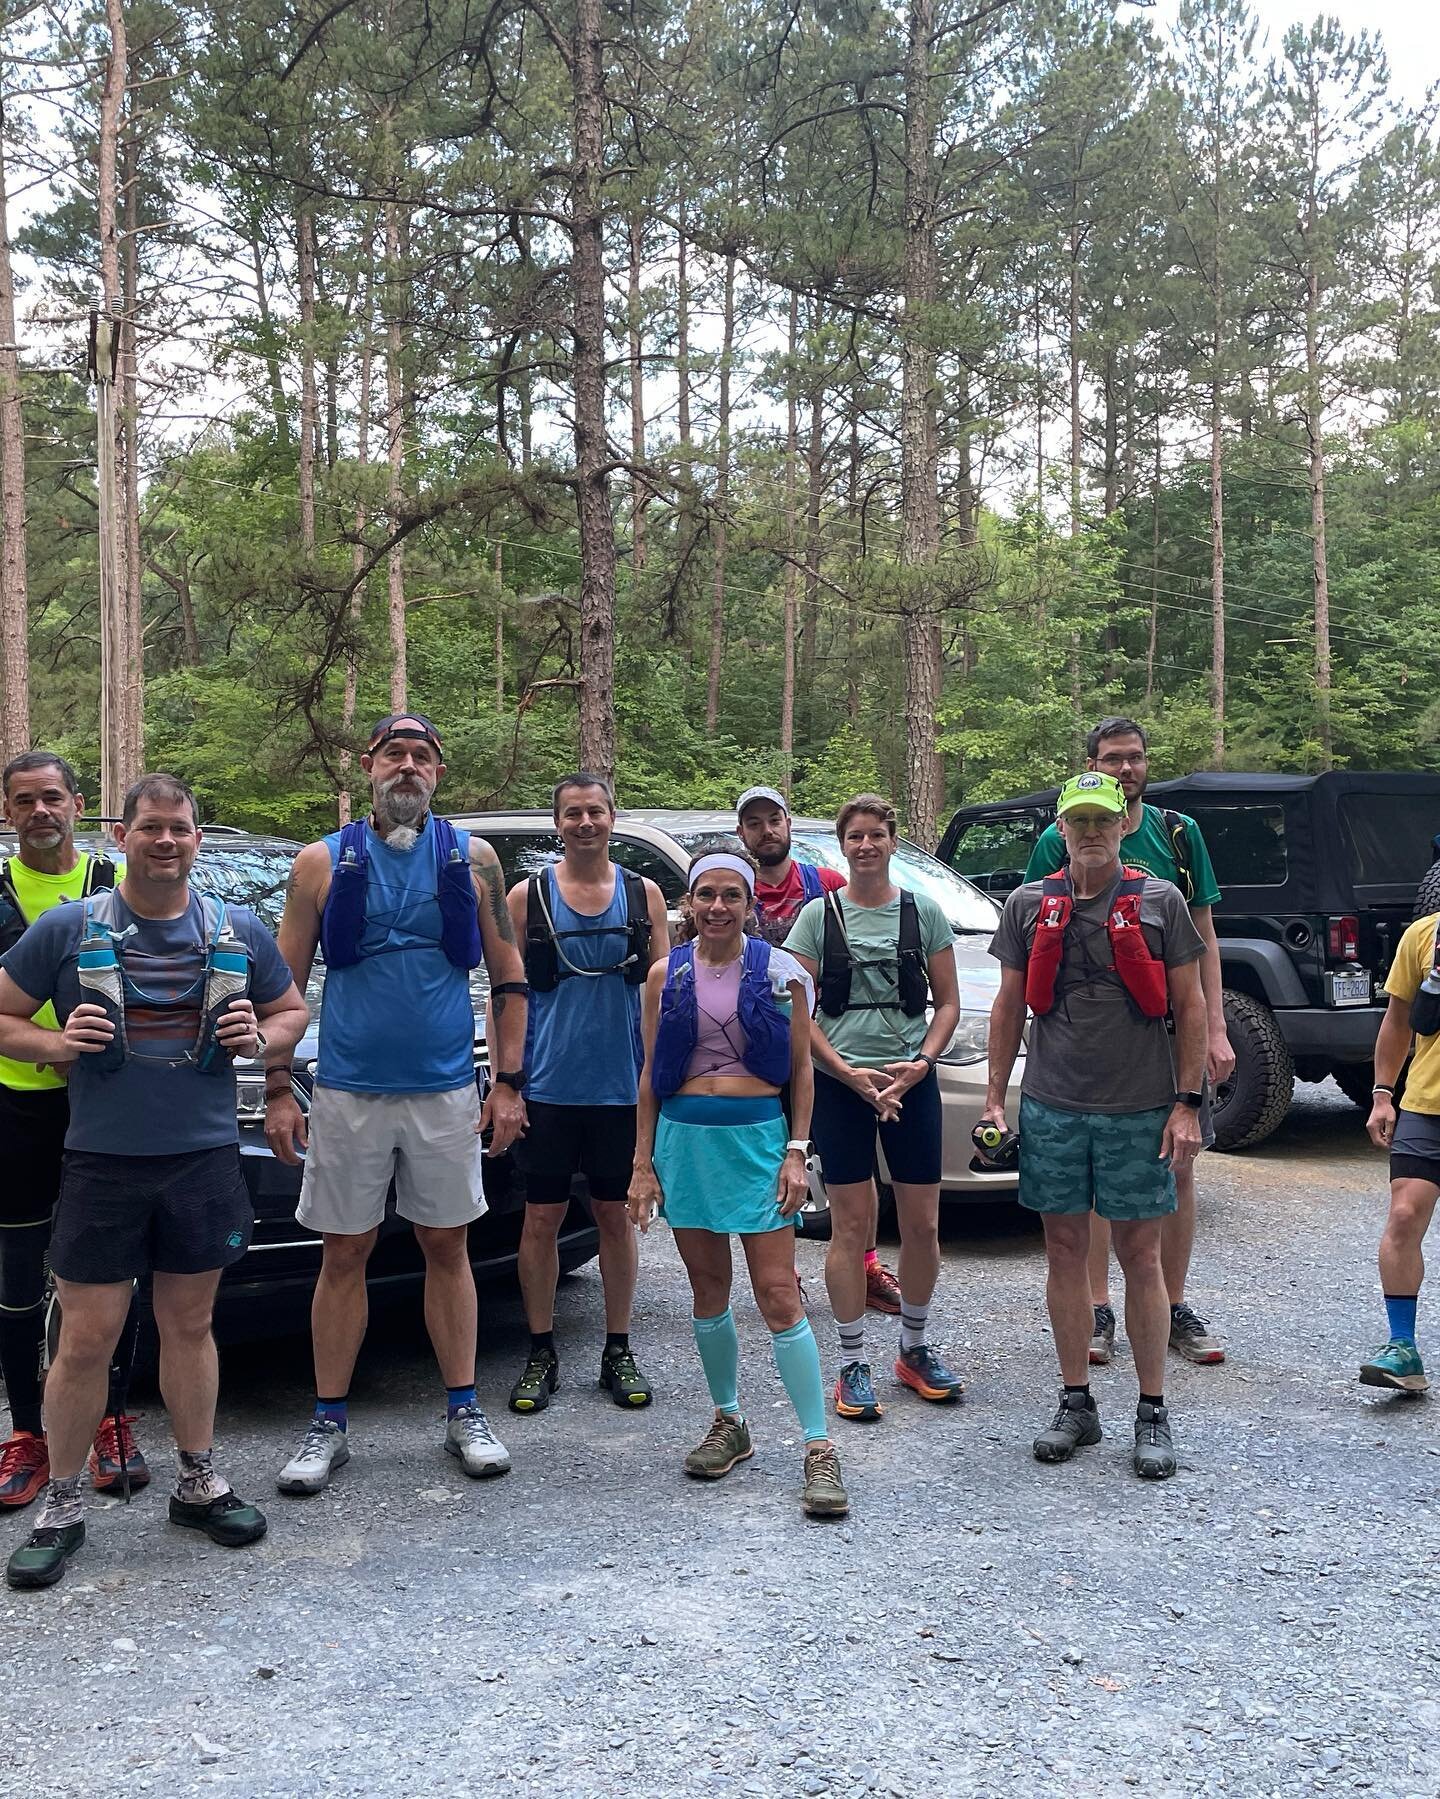 Another GREAT training run in the books!! Even had Graycie out helping today. (Although the popsicles and gummy bears took a beating 😜)

All the Trail Love,
Ryan and Meghaan